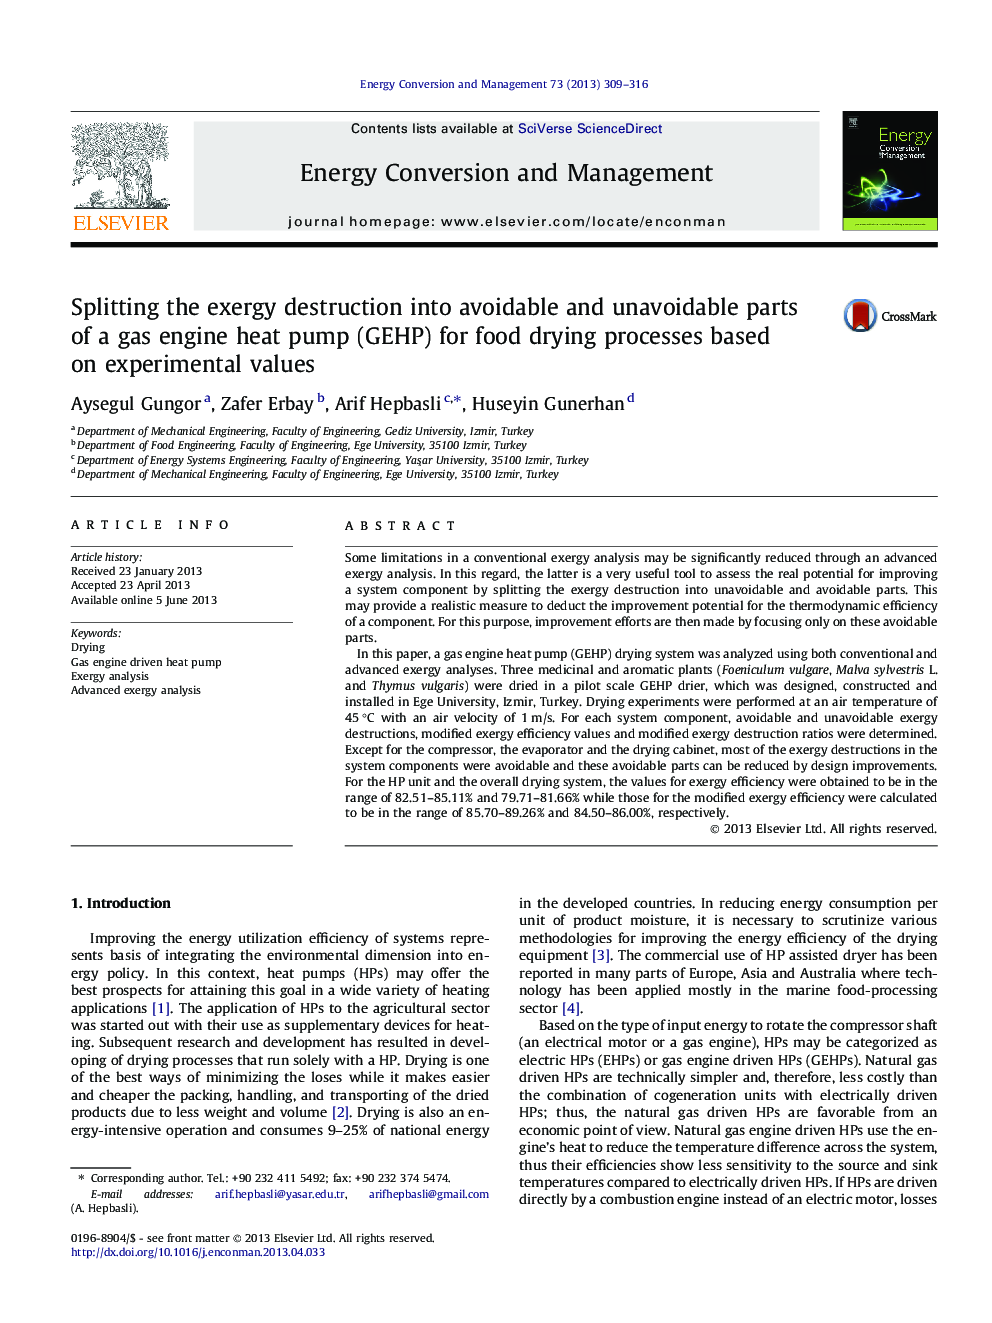 Splitting the exergy destruction into avoidable and unavoidable parts of a gas engine heat pump (GEHP) for food drying processes based on experimental values